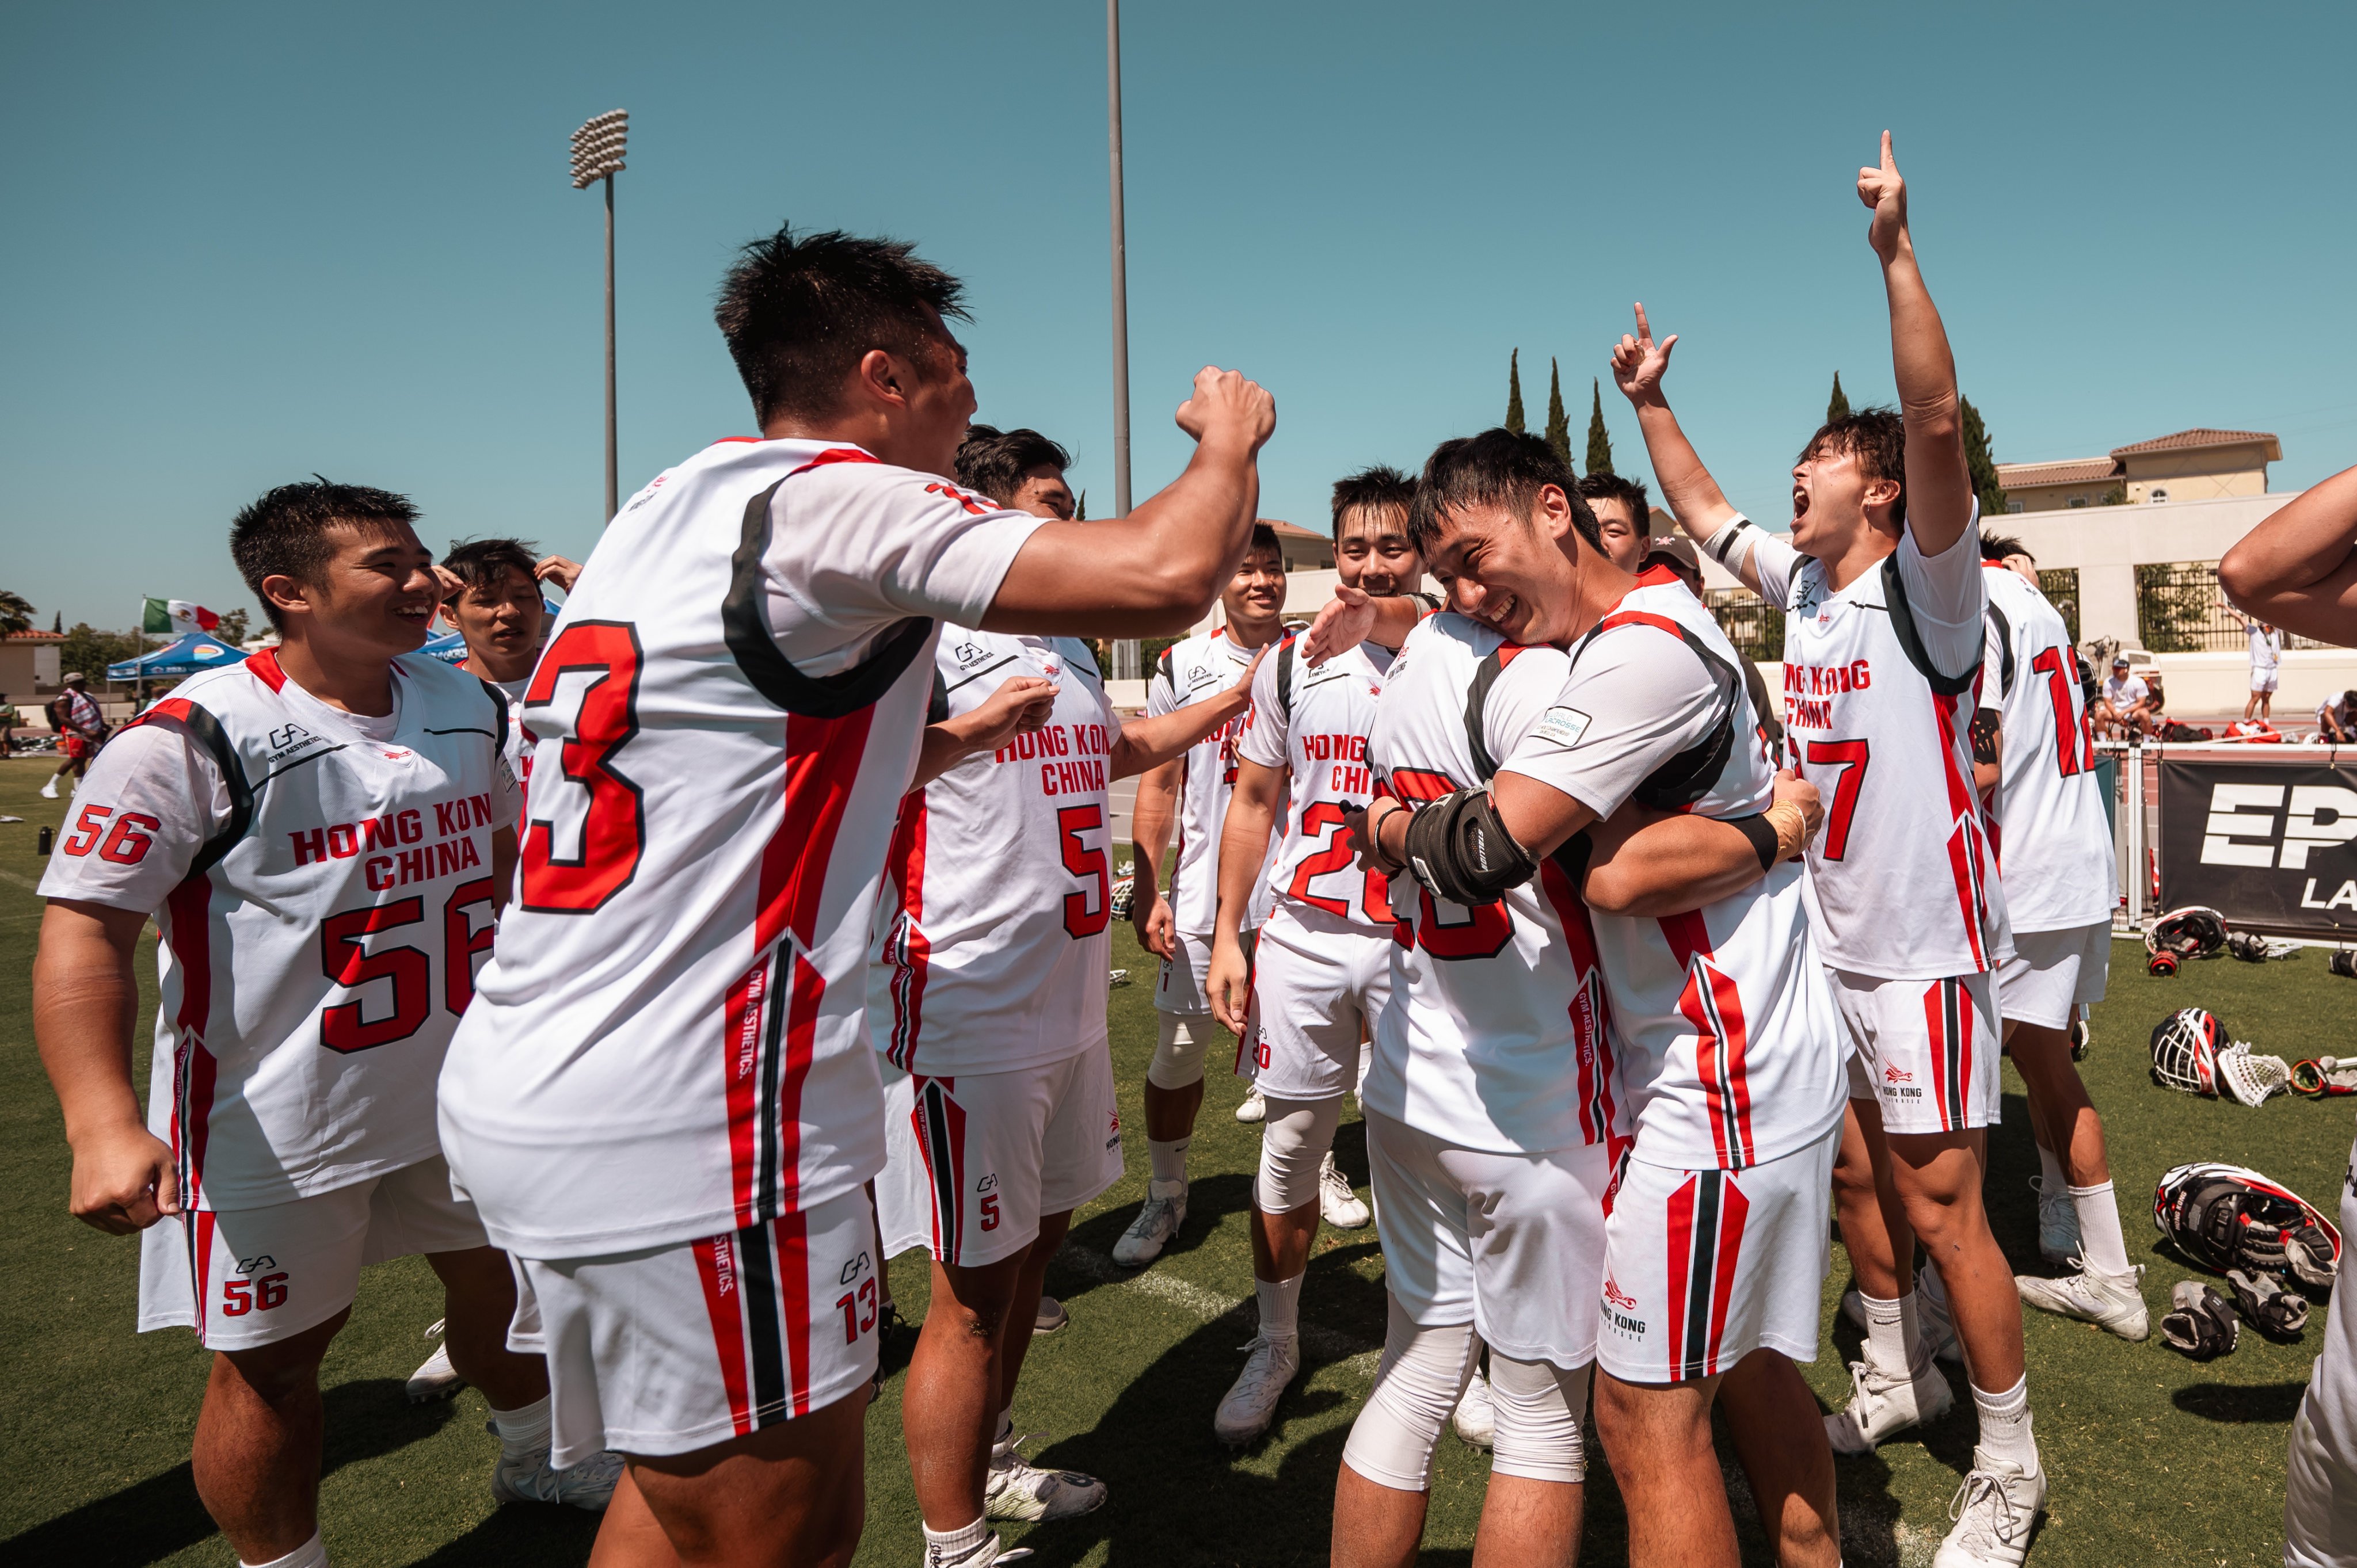 Hong Kong’s lacrosse players celebrate reaching the main play-offs bracket at July’s World Championships. Photo: Handout 